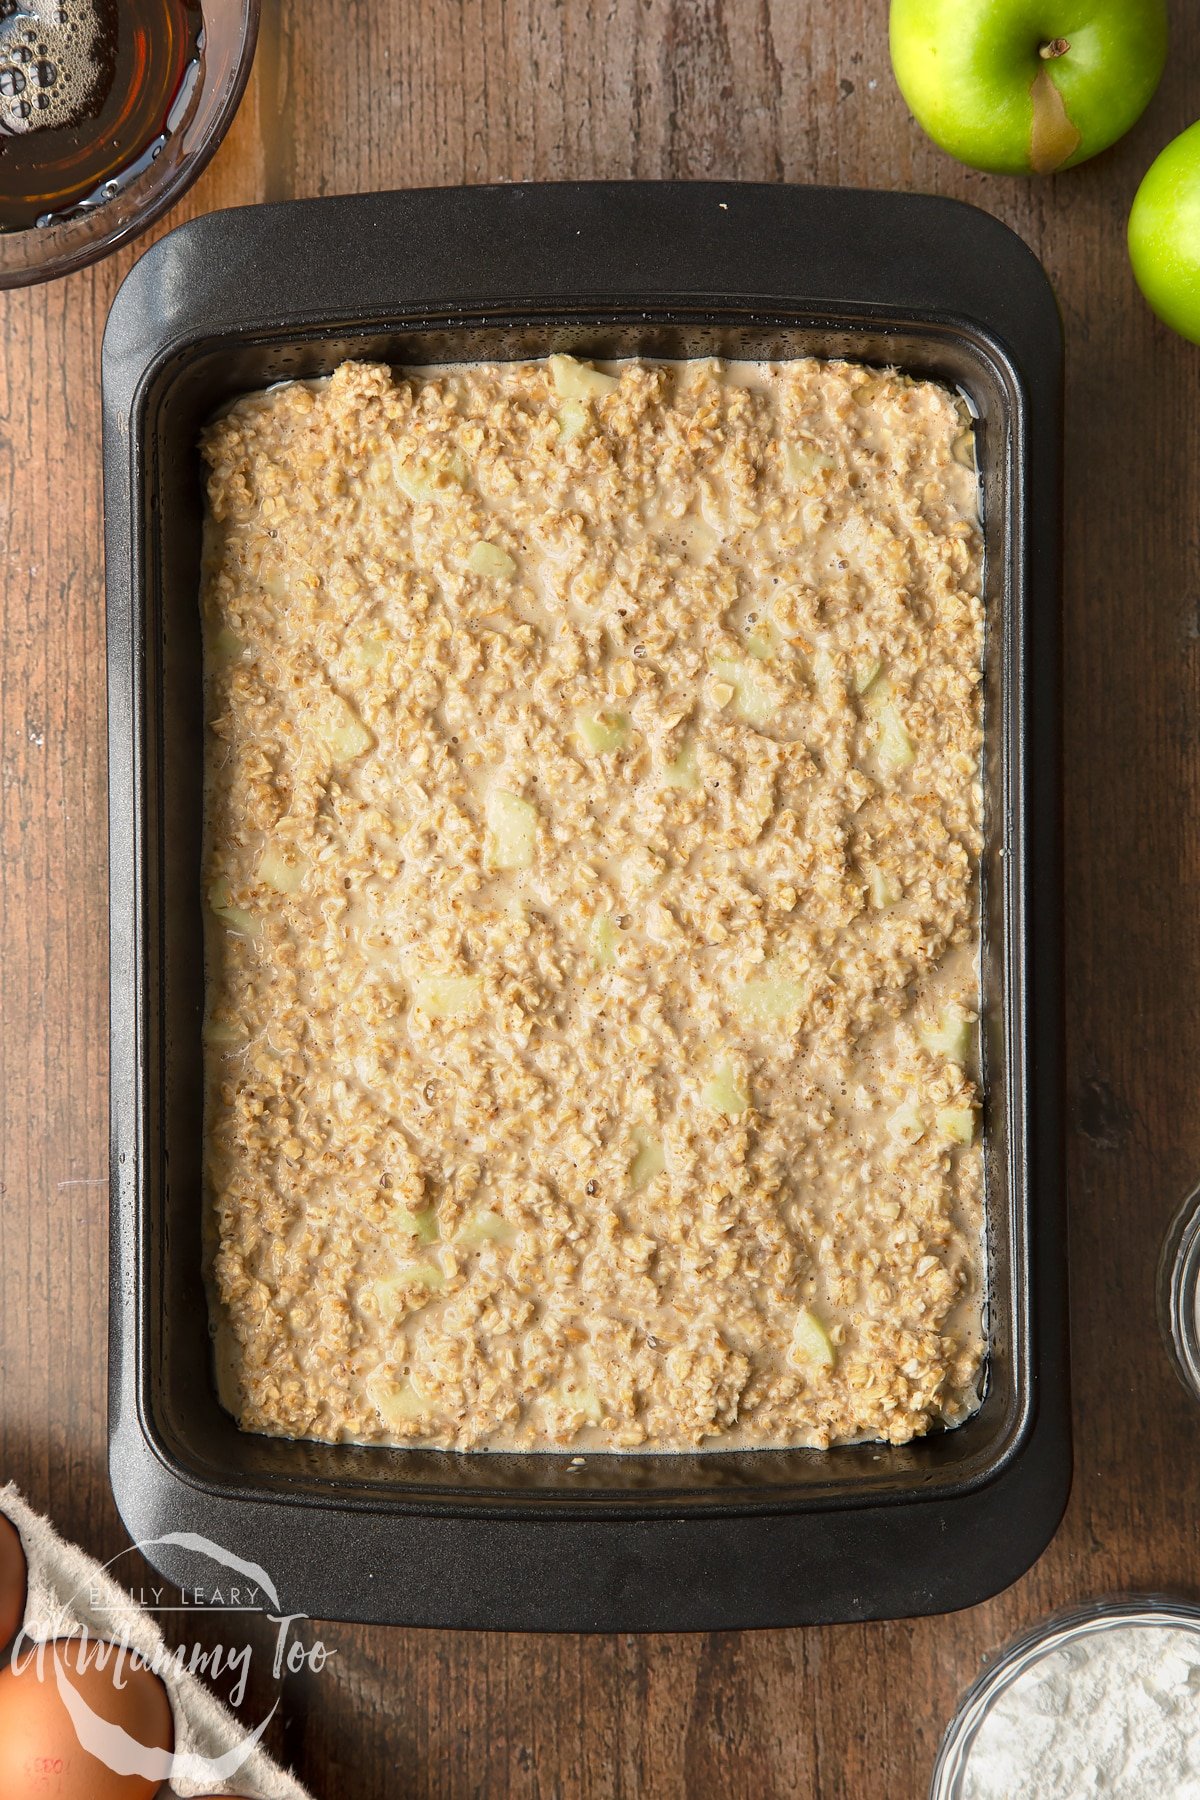 Oats, baking powder, salt, milk, eggs, maple syrup and apple mixed together in a tray. Ingredients to make porridge squares surround the bowl.